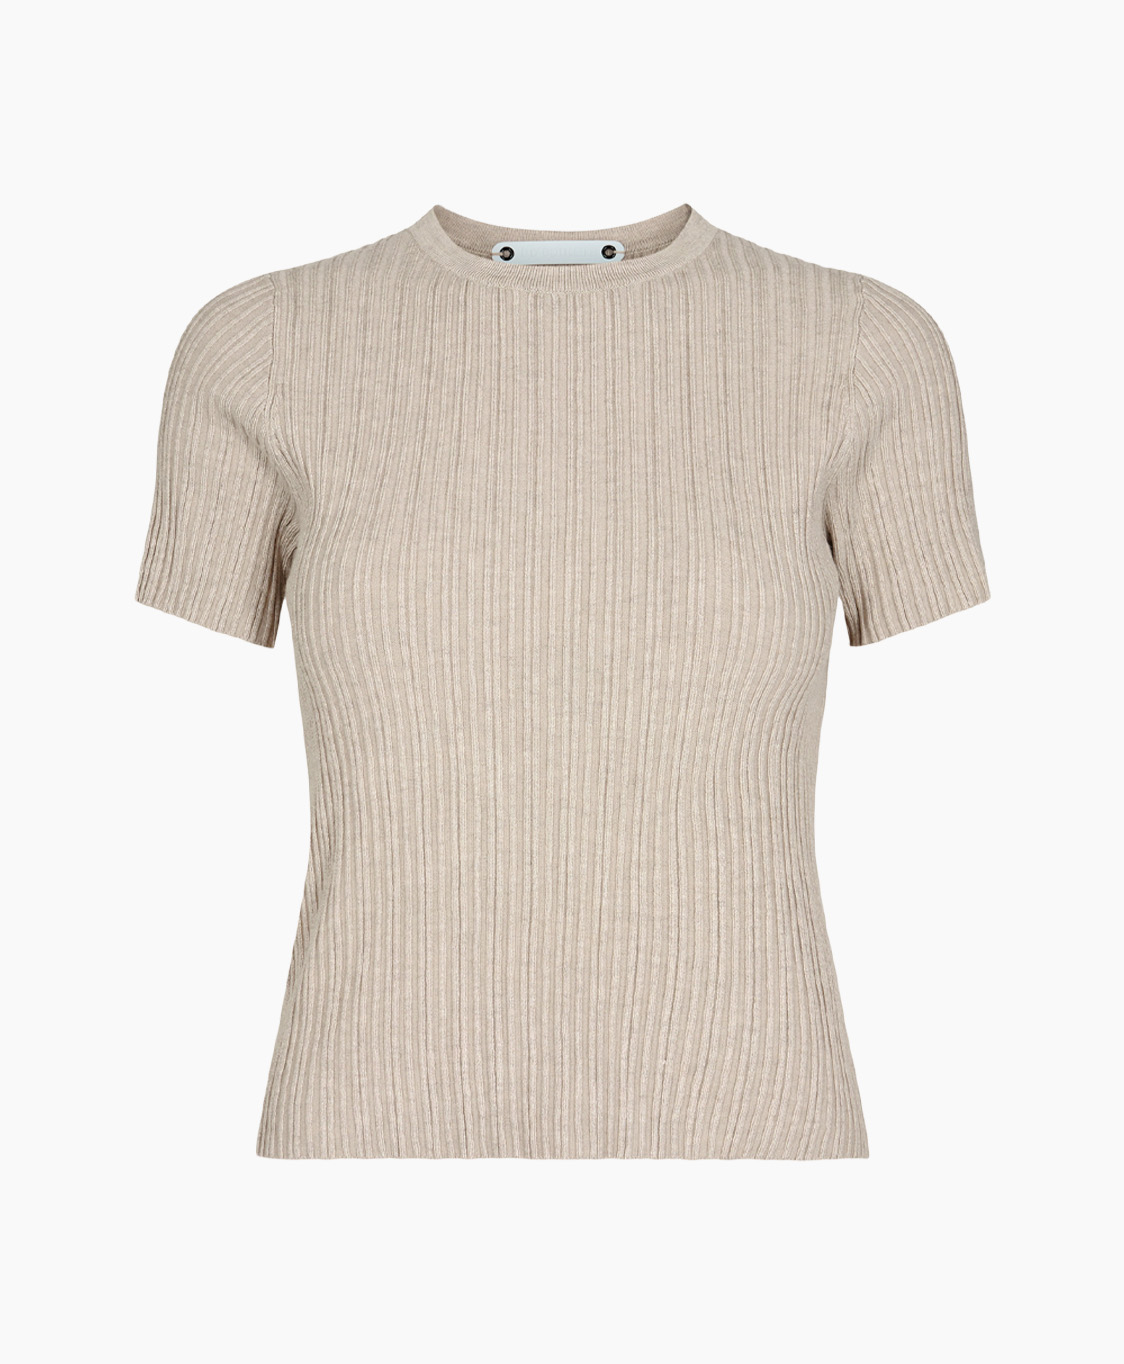 Co'couture Sweater Badu Tee Knit Off White